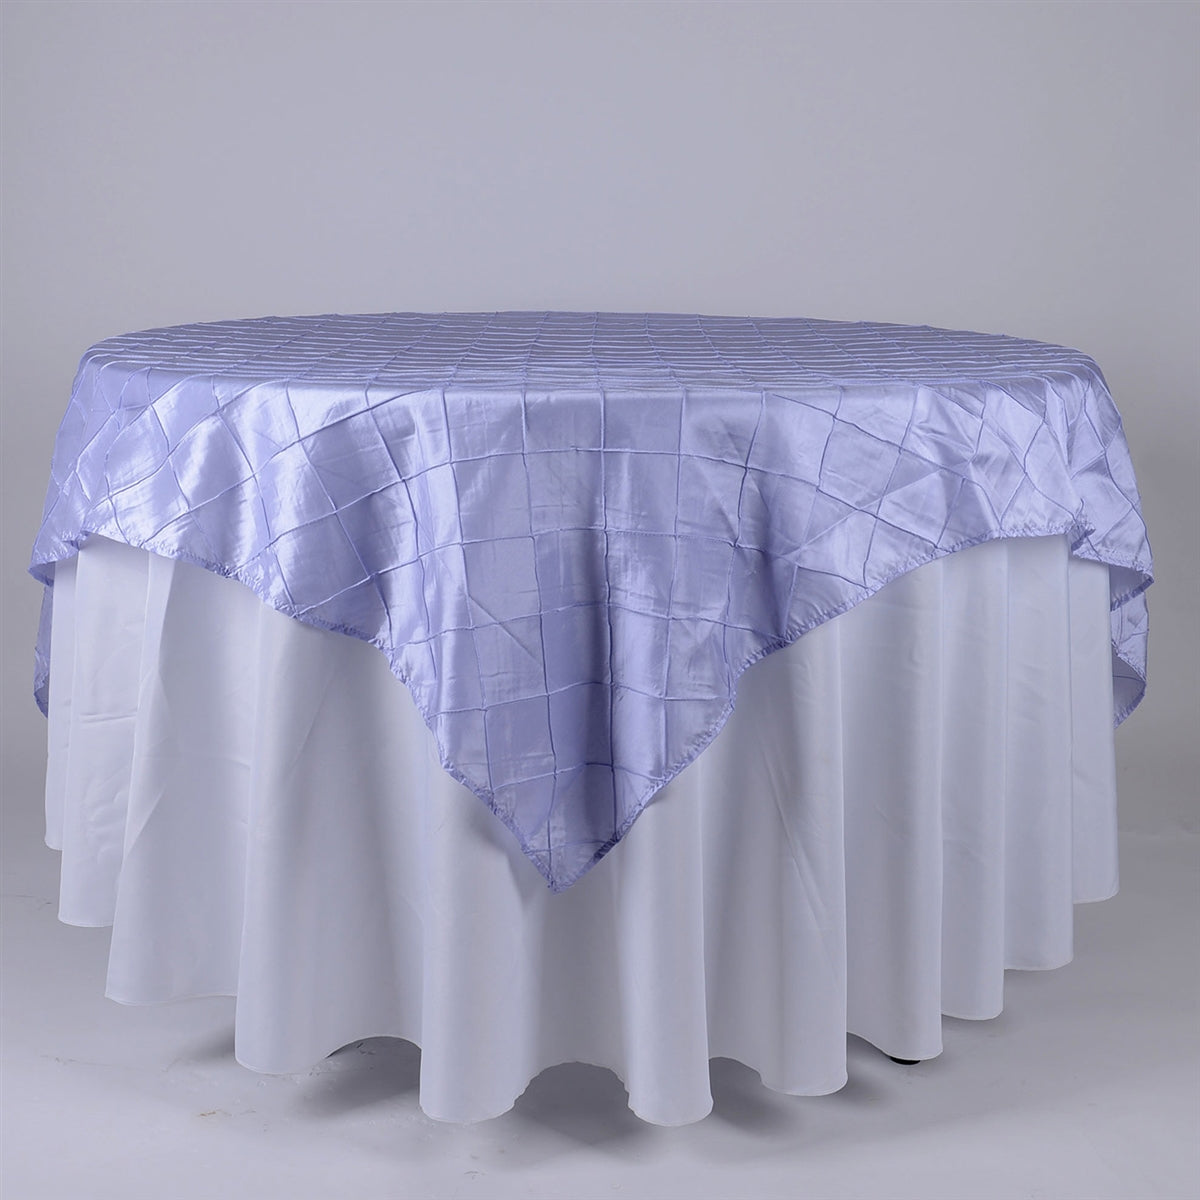 Lavender - 85 inch x 85 inch Square Pintuck Satin Overlay